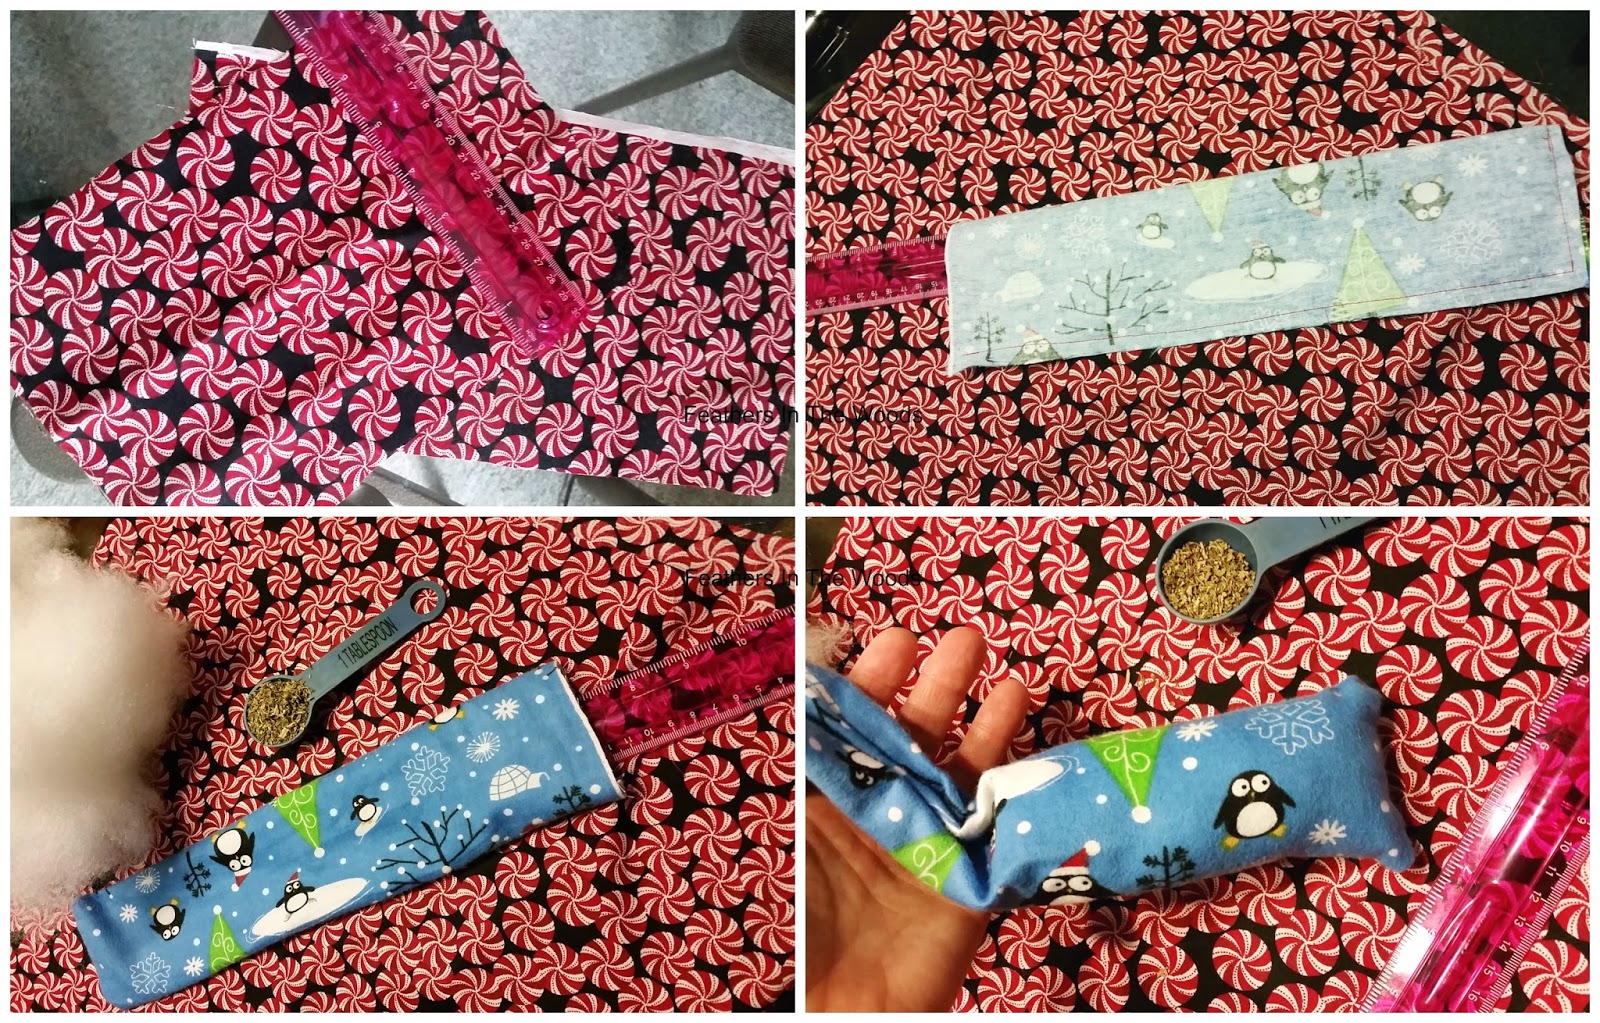 and lots and lots of cat nip! JUMBO Catnip kicker toy Stuffed with upcycled fabric scraps